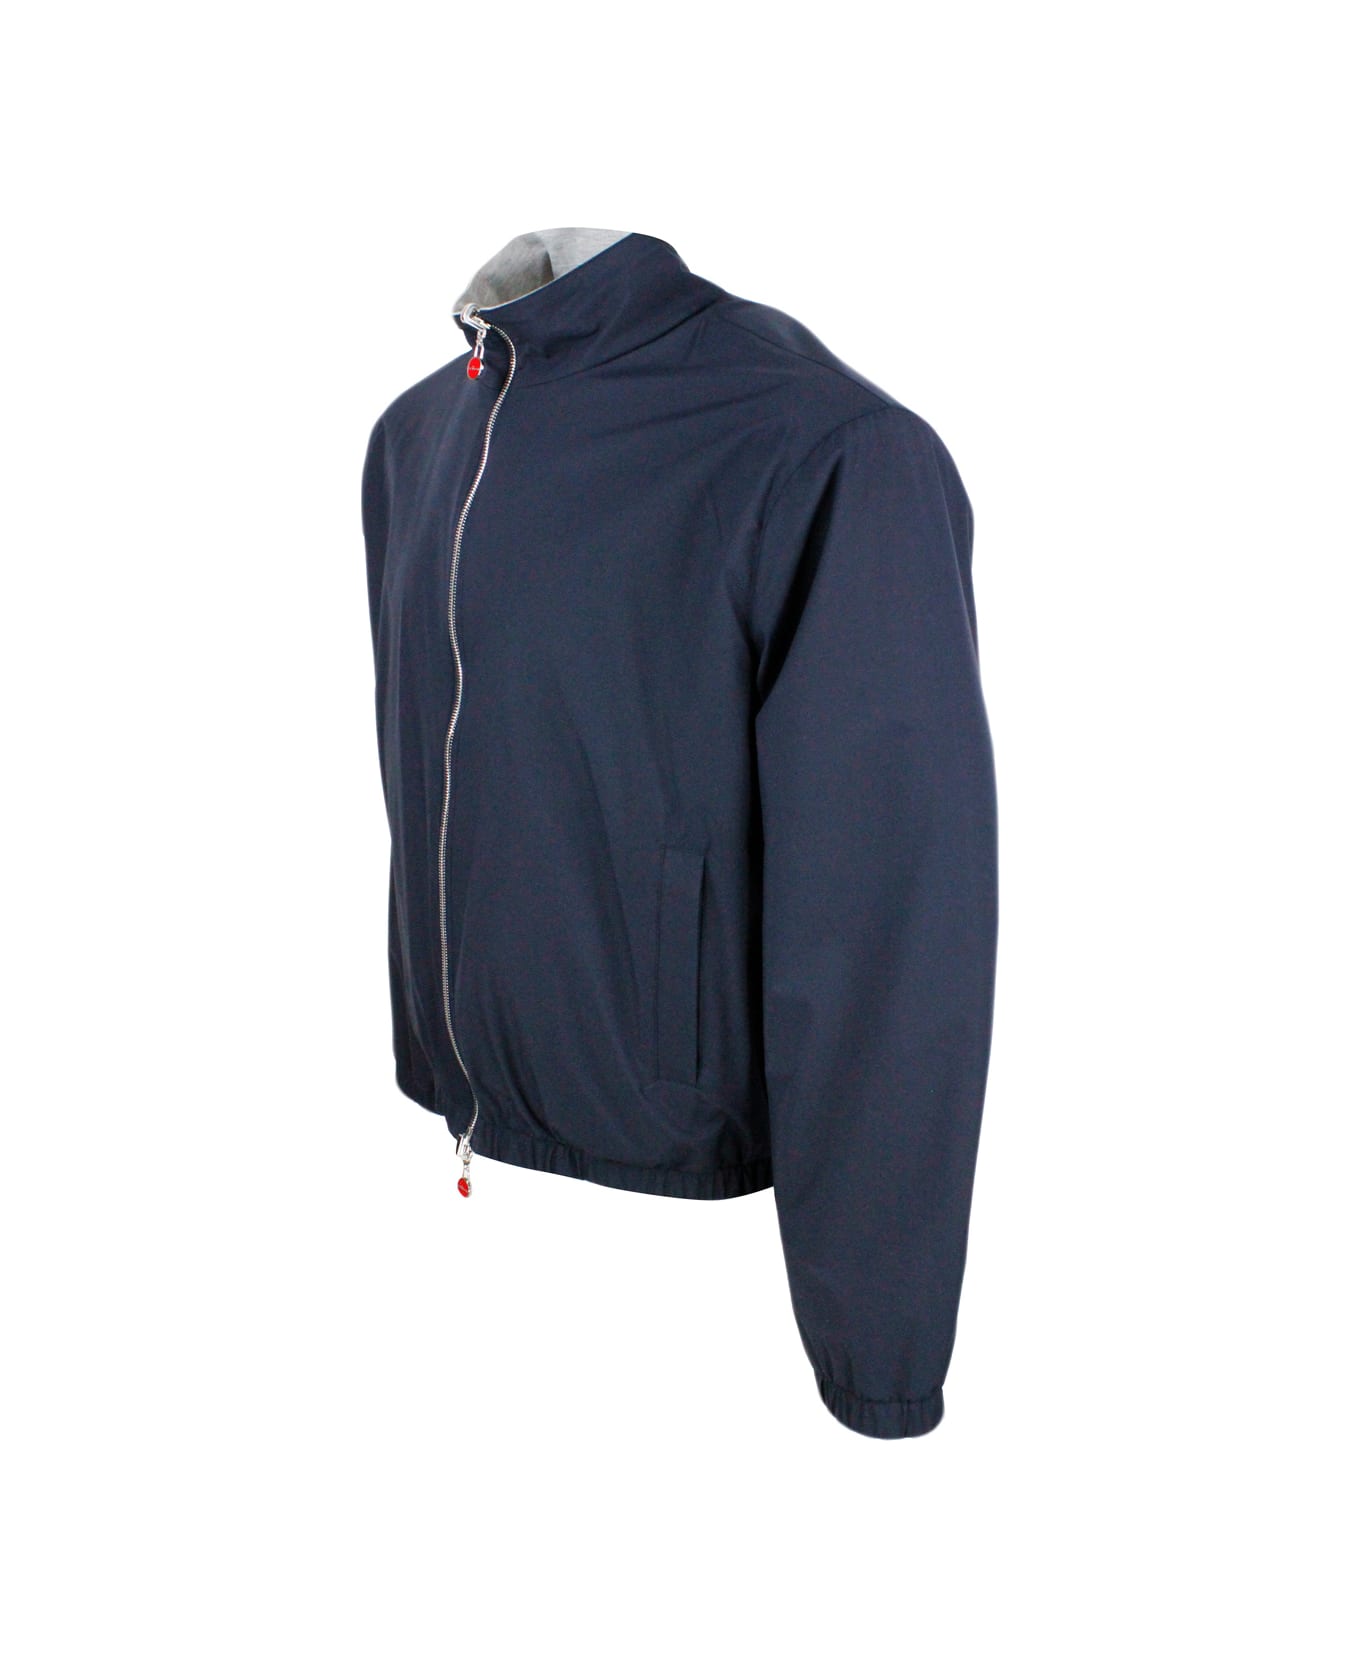 Kiton Super Light Bomber Jacket In Very Soft Technical Fabric With Zip Closure With Logo On The Zip Pull And Interior Lined In Fine Cotton - Blu